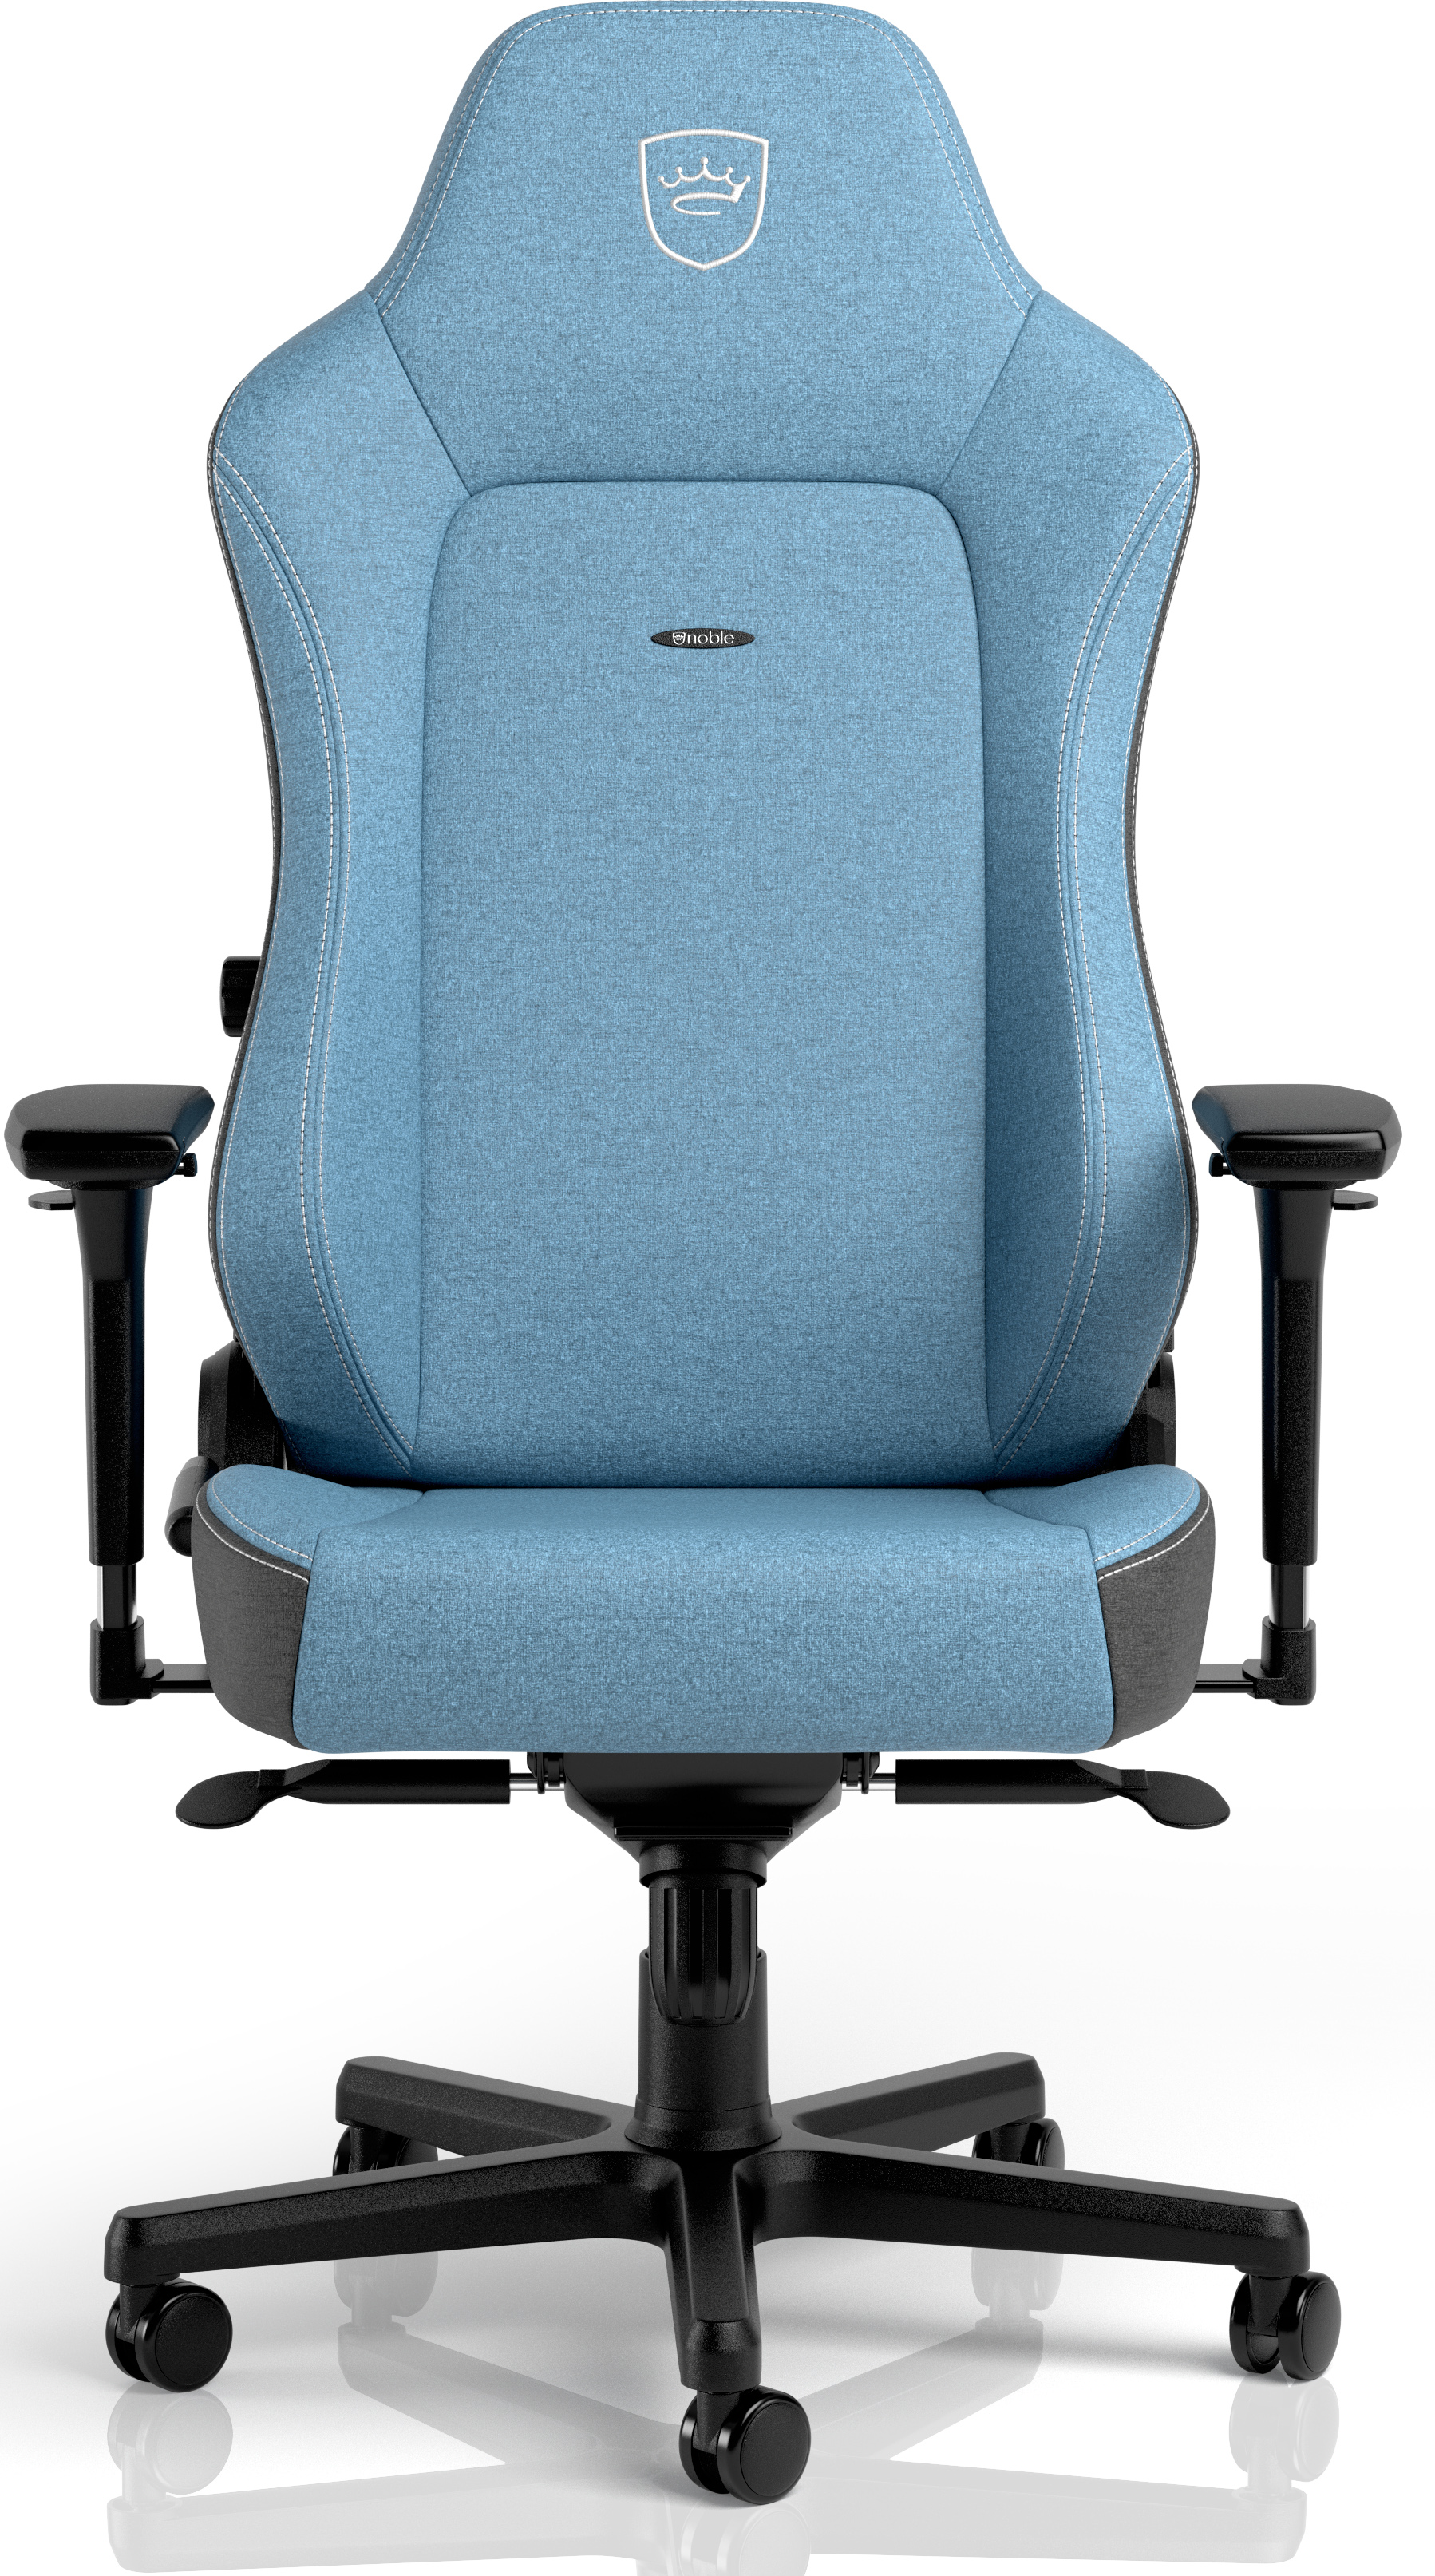 noblechairs - ** B Grade ** Cadeira noblechairs Hero Two Tone - Blue Limited Edition